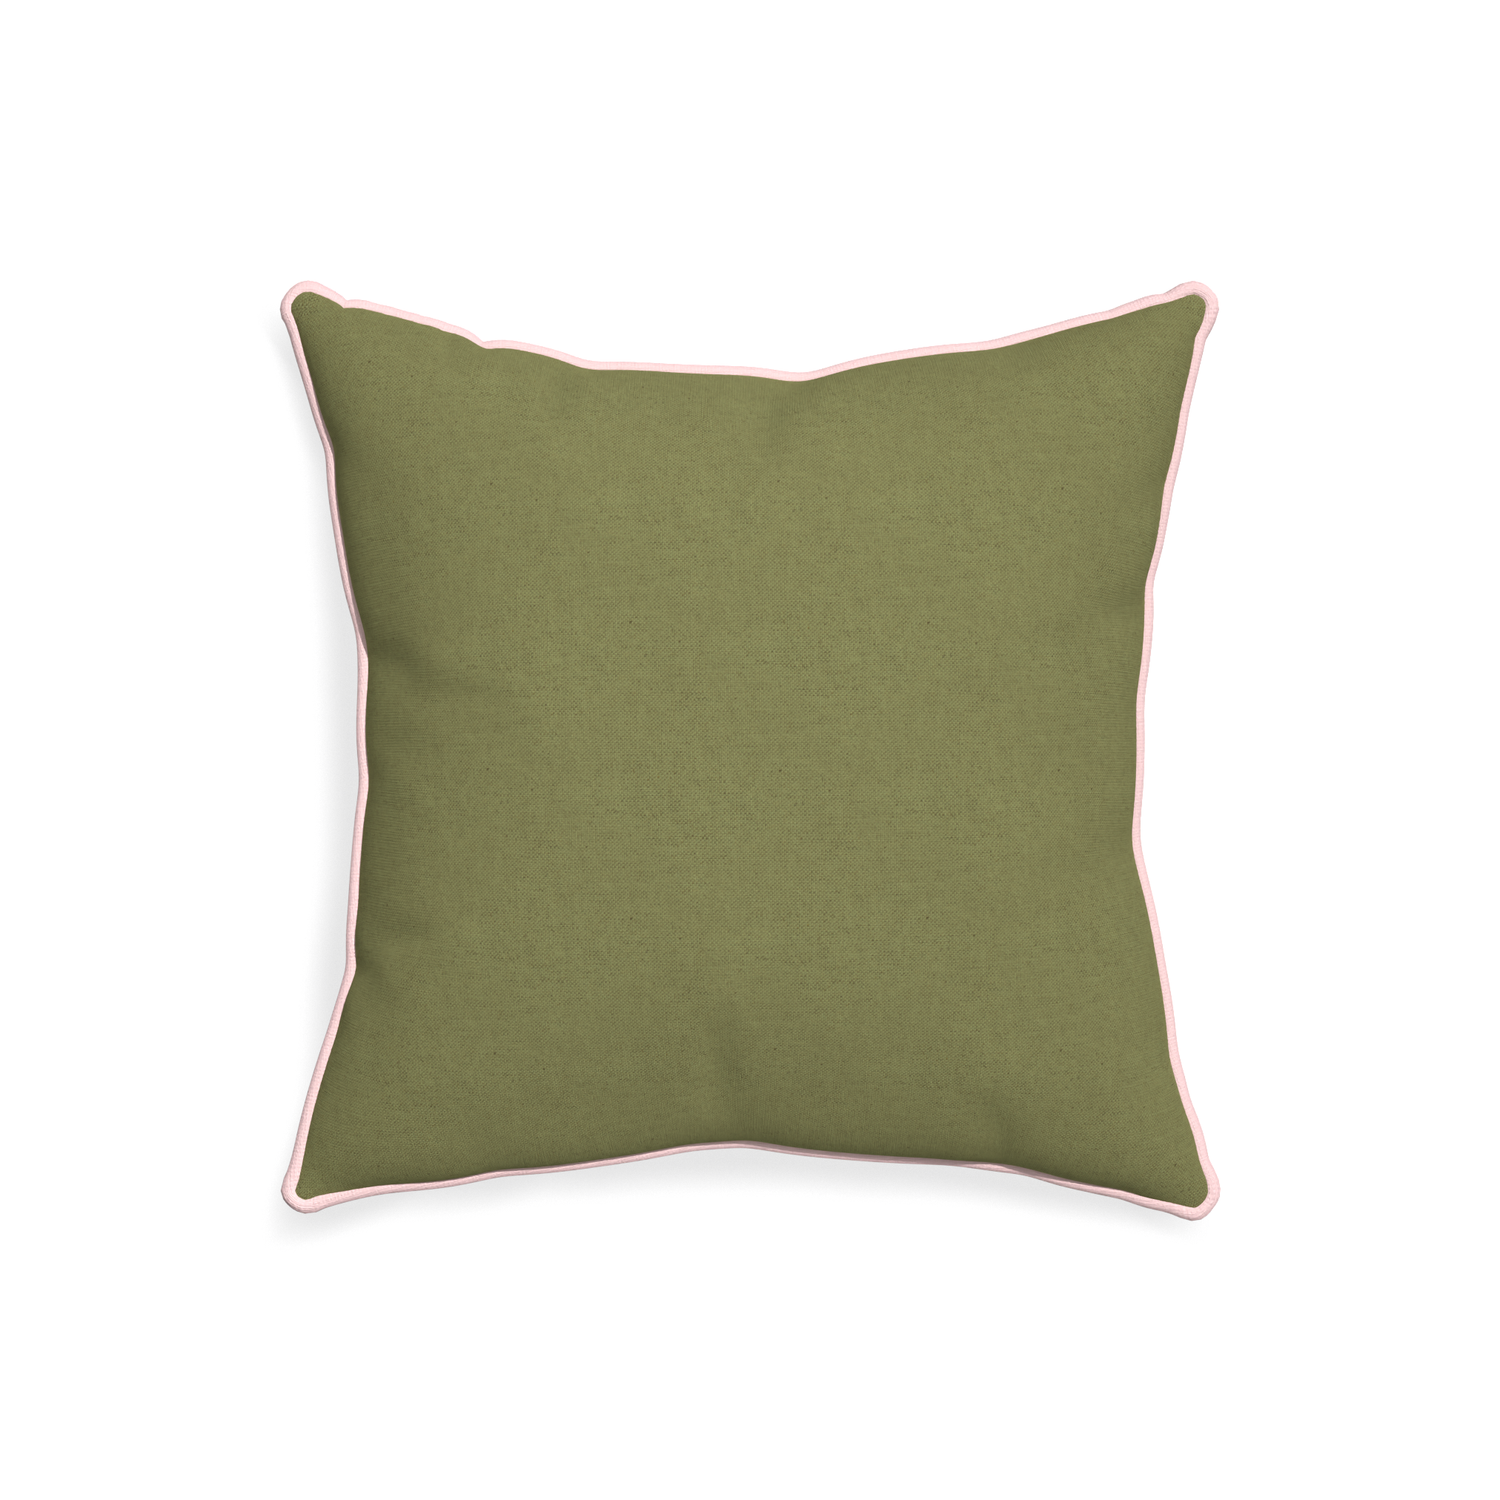 20-square moss custom moss greenpillow with petal piping on white background